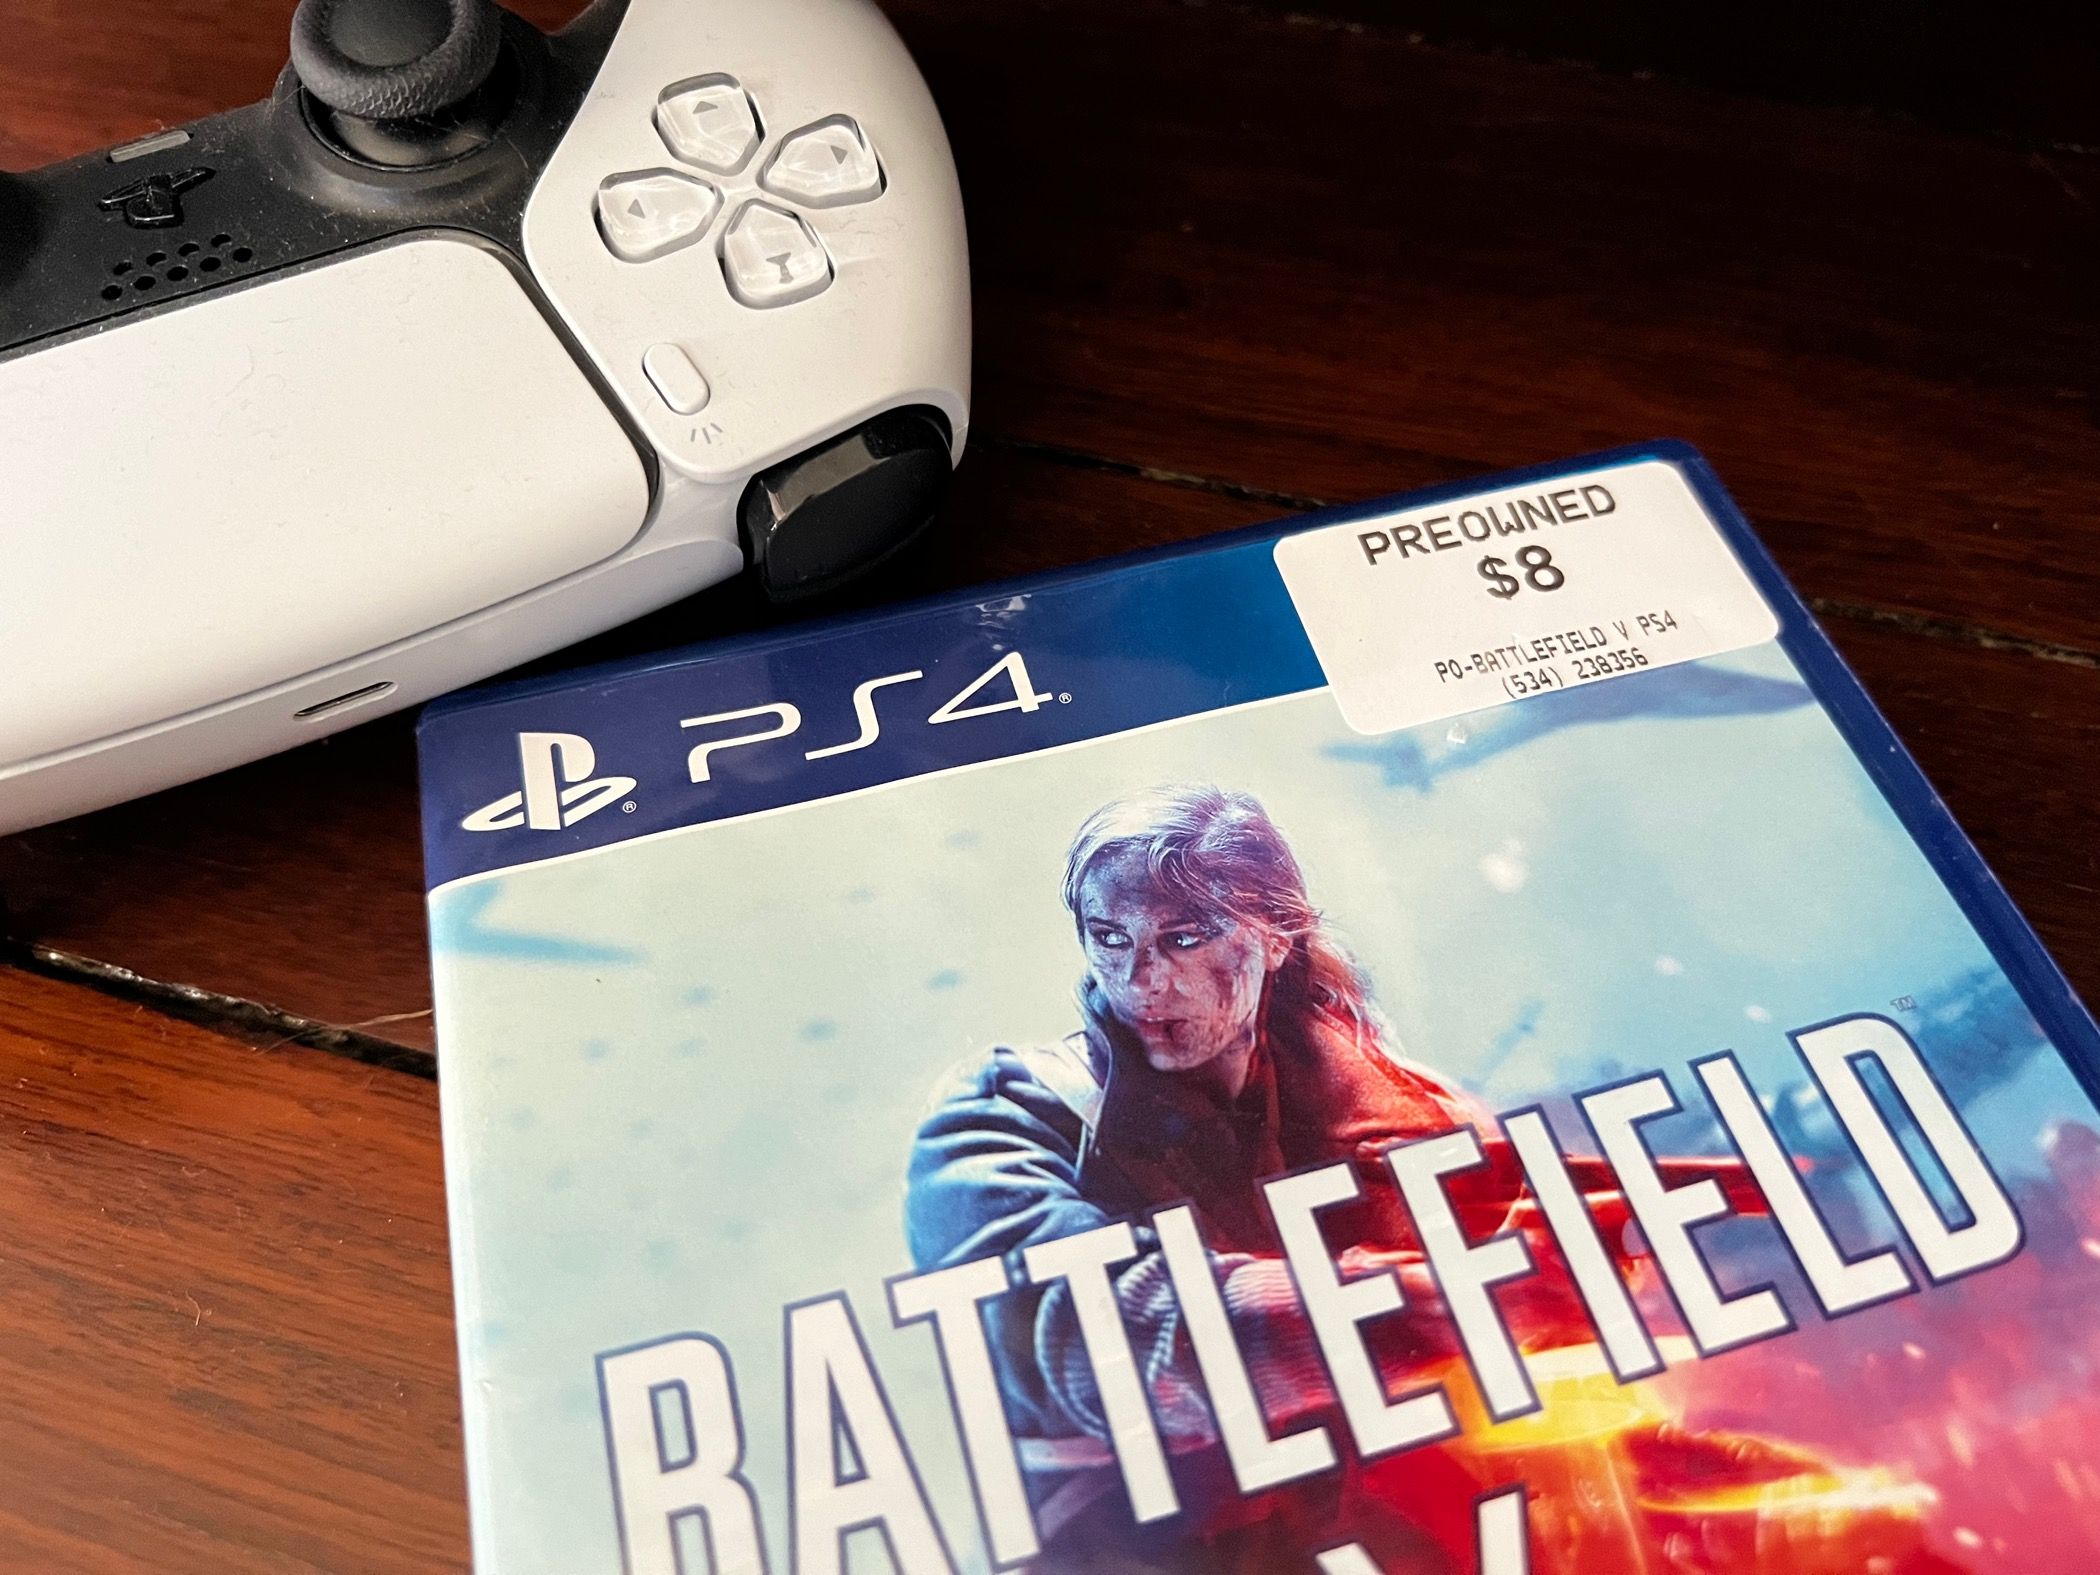 A pre-owned copy of Battlefield V for $8